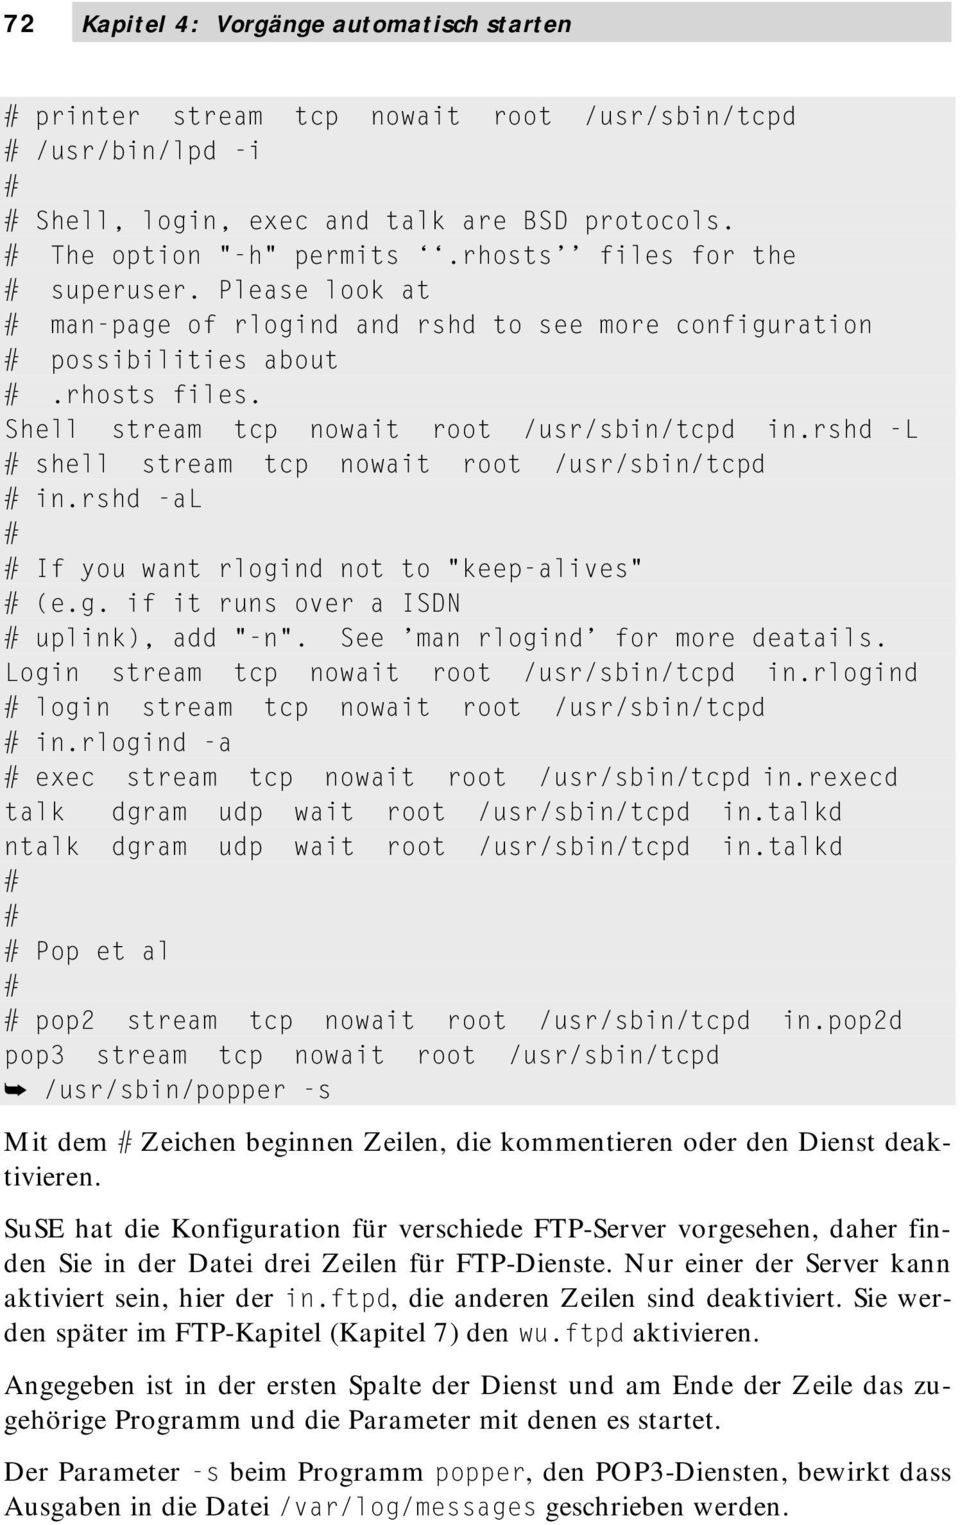 rshd -L shell stream tcp nowait root /usr/sbin/tcpd in.rshd -al If you want rlogind not to "keep-alives" (e.g. if it runs over a ISDN uplink), add "-n". See man rlogind for more deatails.